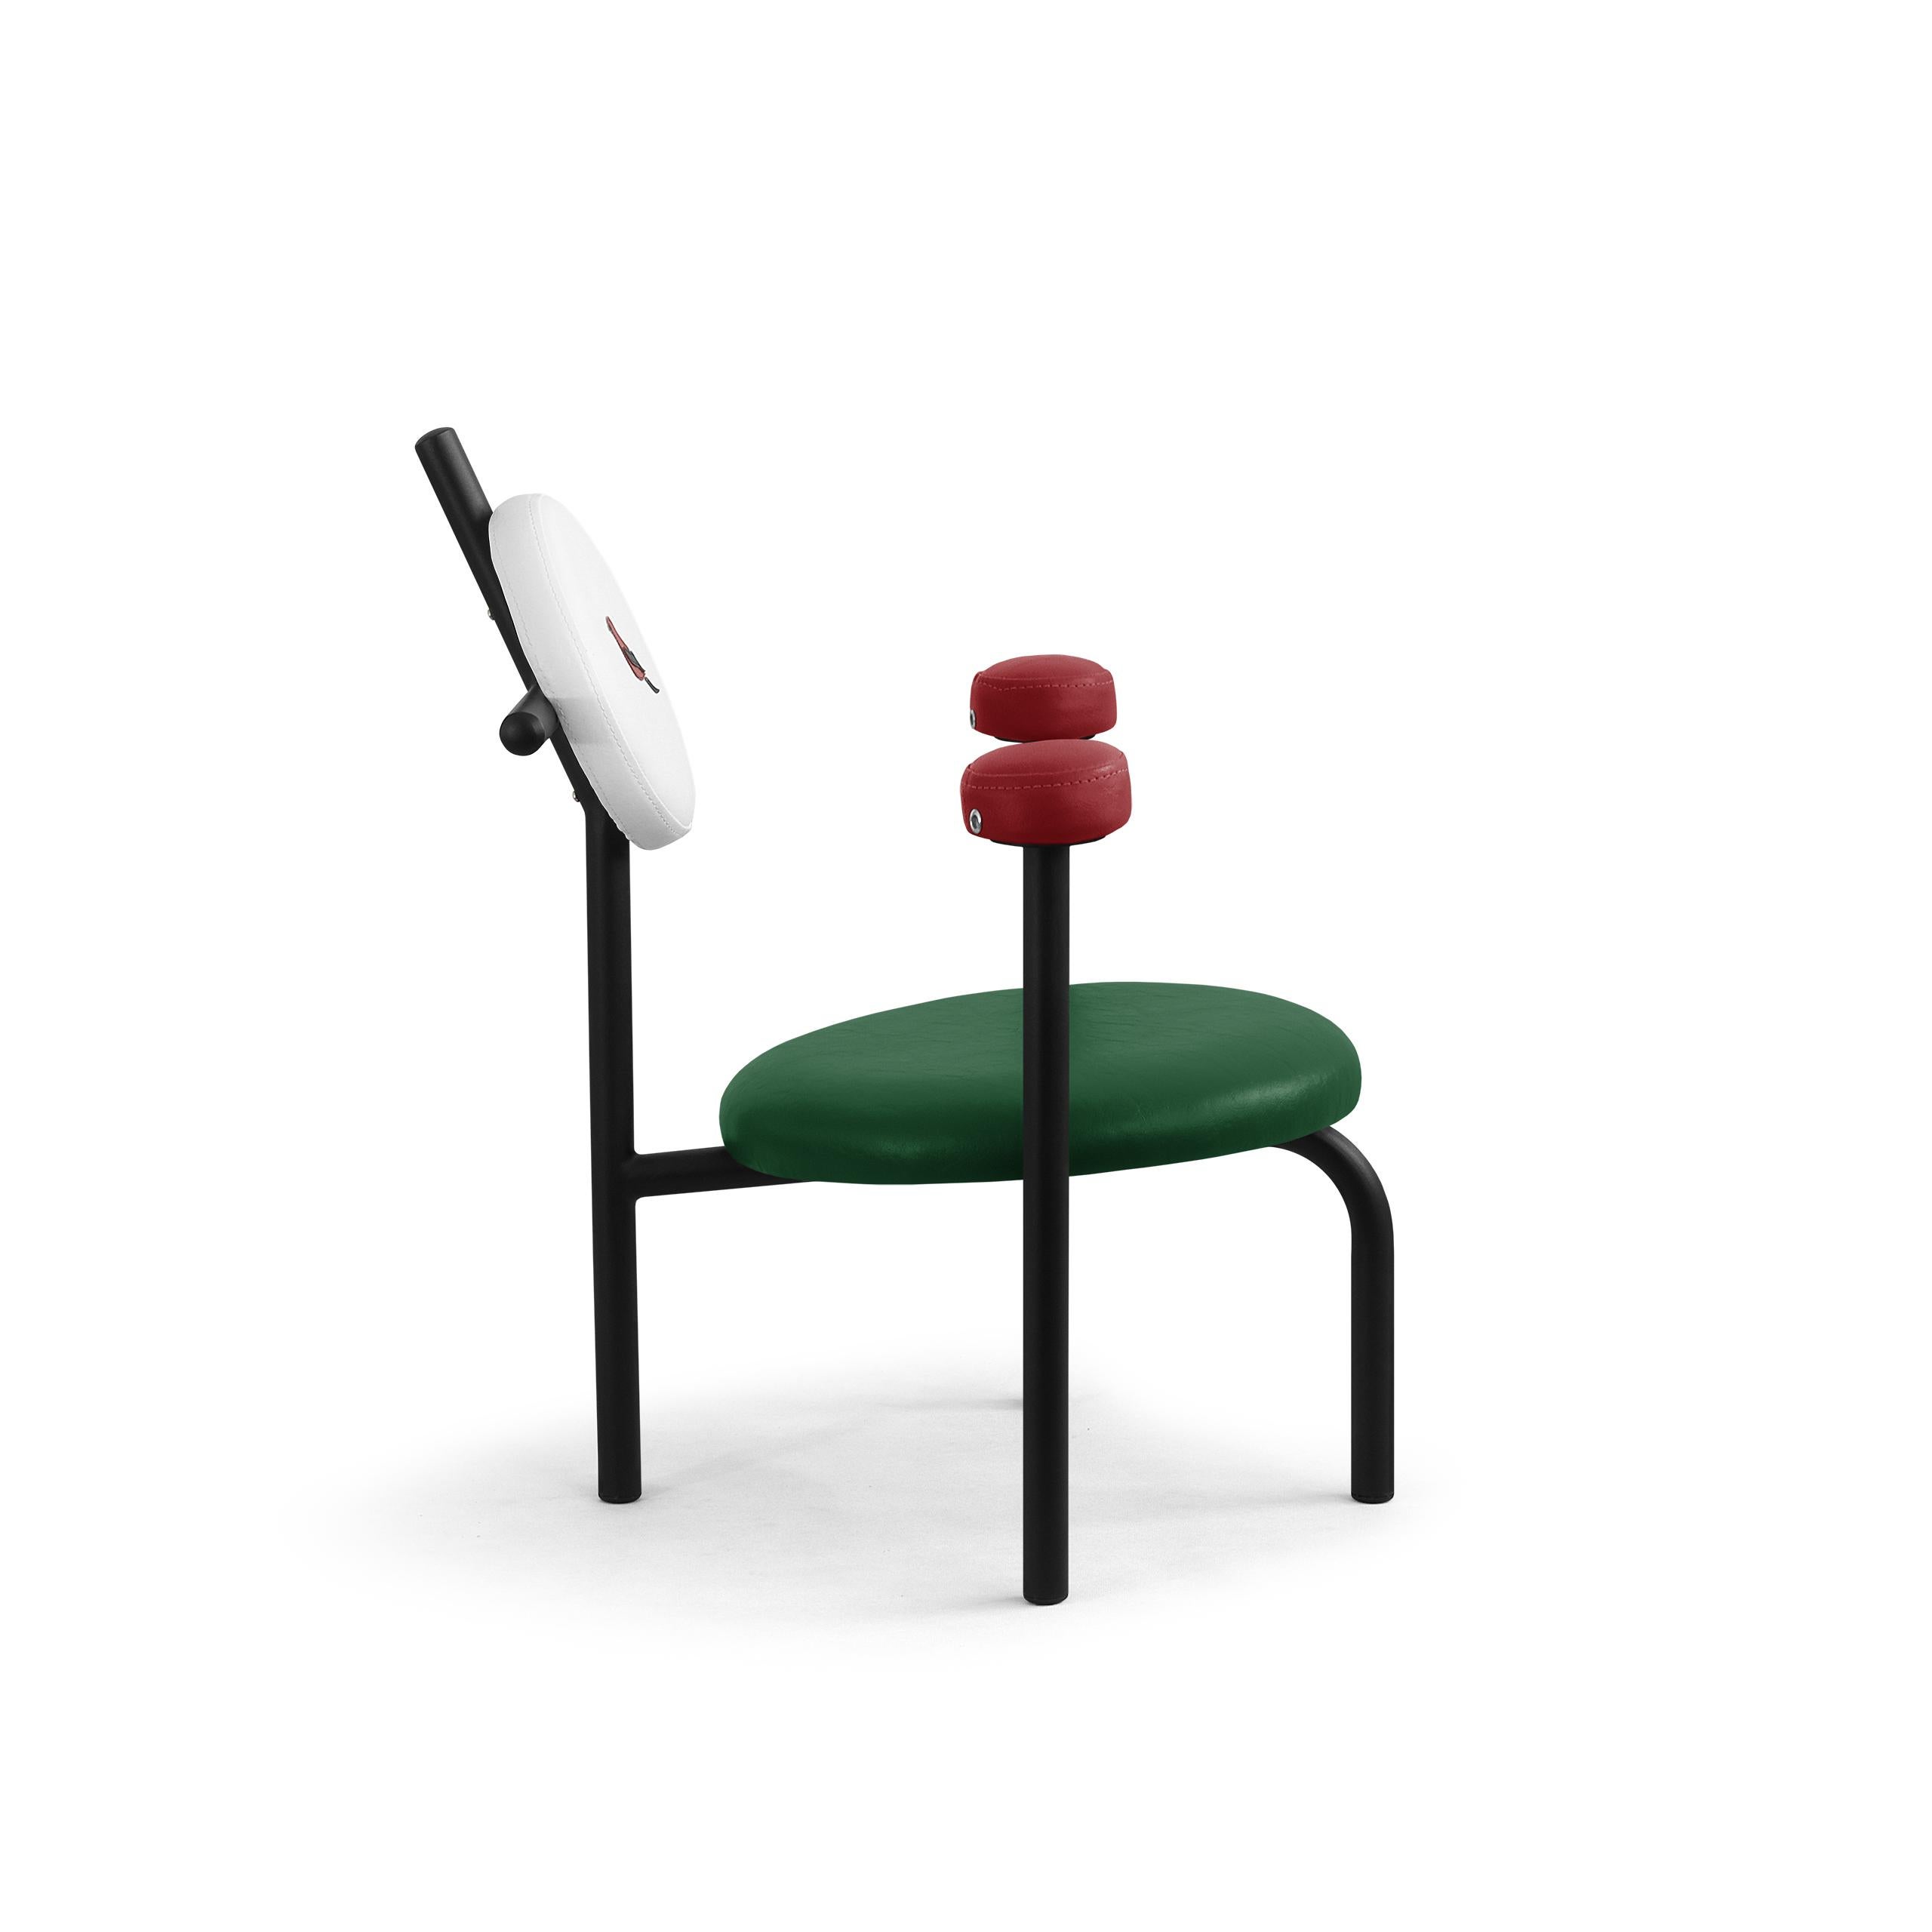 Powder-Coated PK18 Impermeable Armchair, Green Seat & Black Metal Structure by Paulo Kobylka For Sale